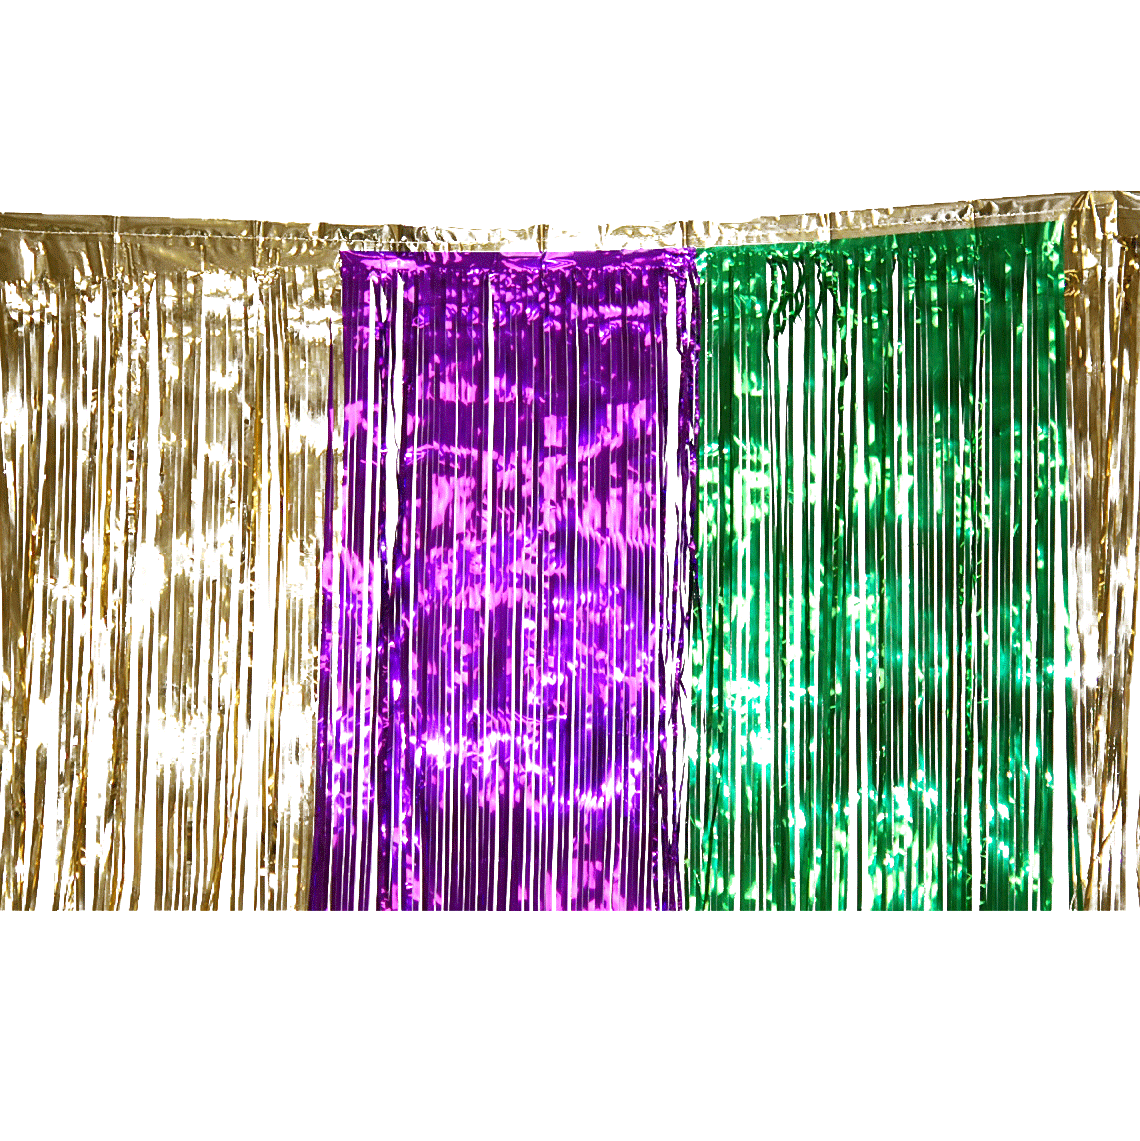 29" x 14' Purple, Green, and Gold Fringe Skirting